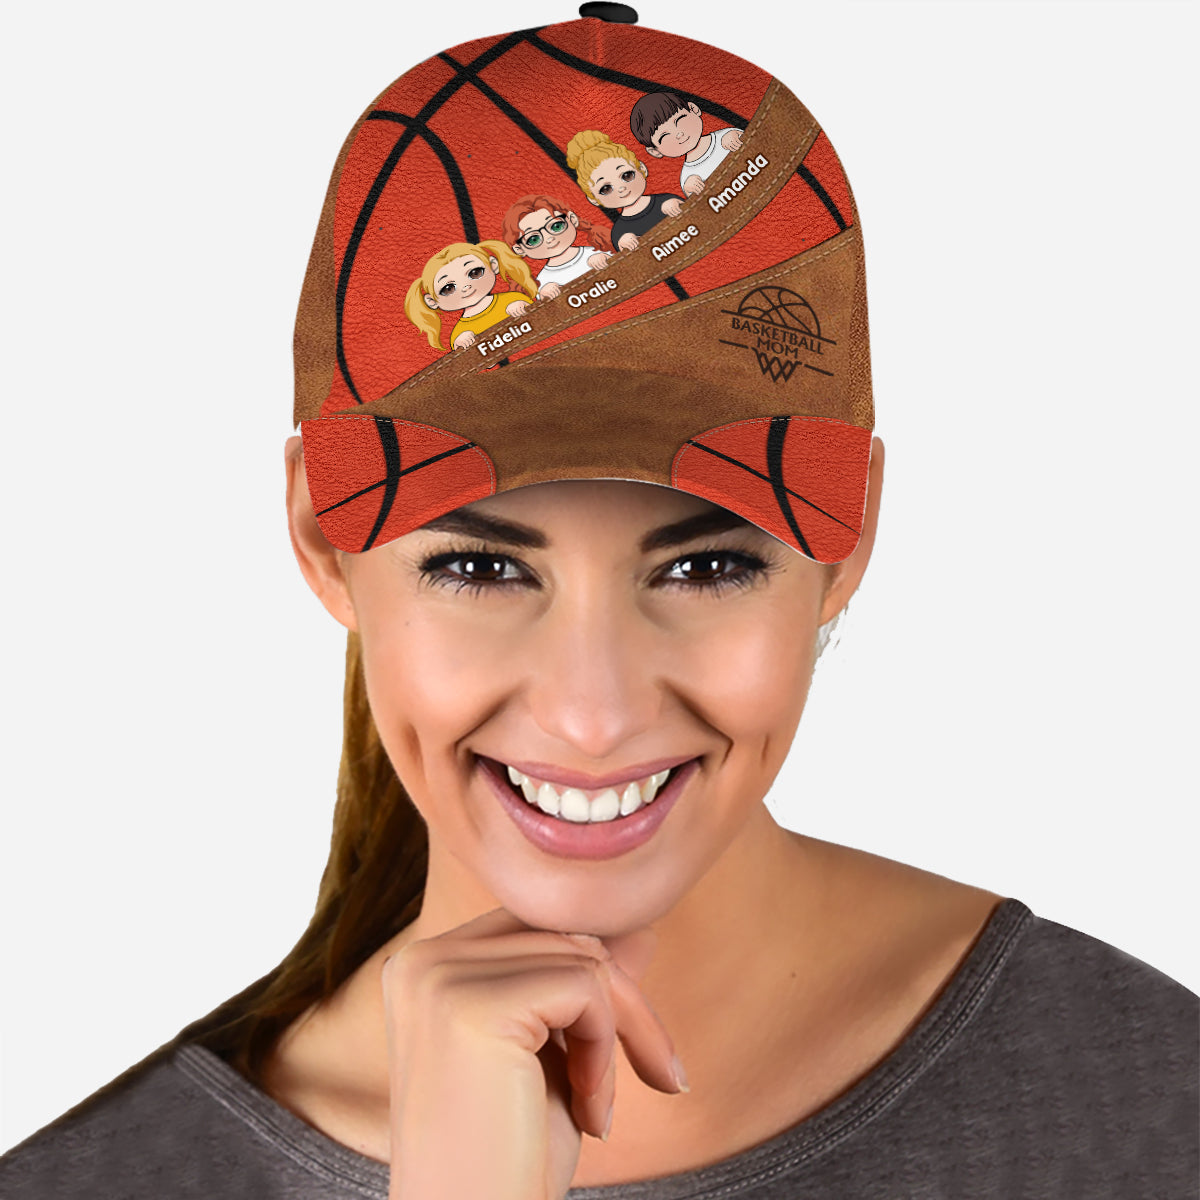 Basketball Mom - Personalized Basketball Classic Cap